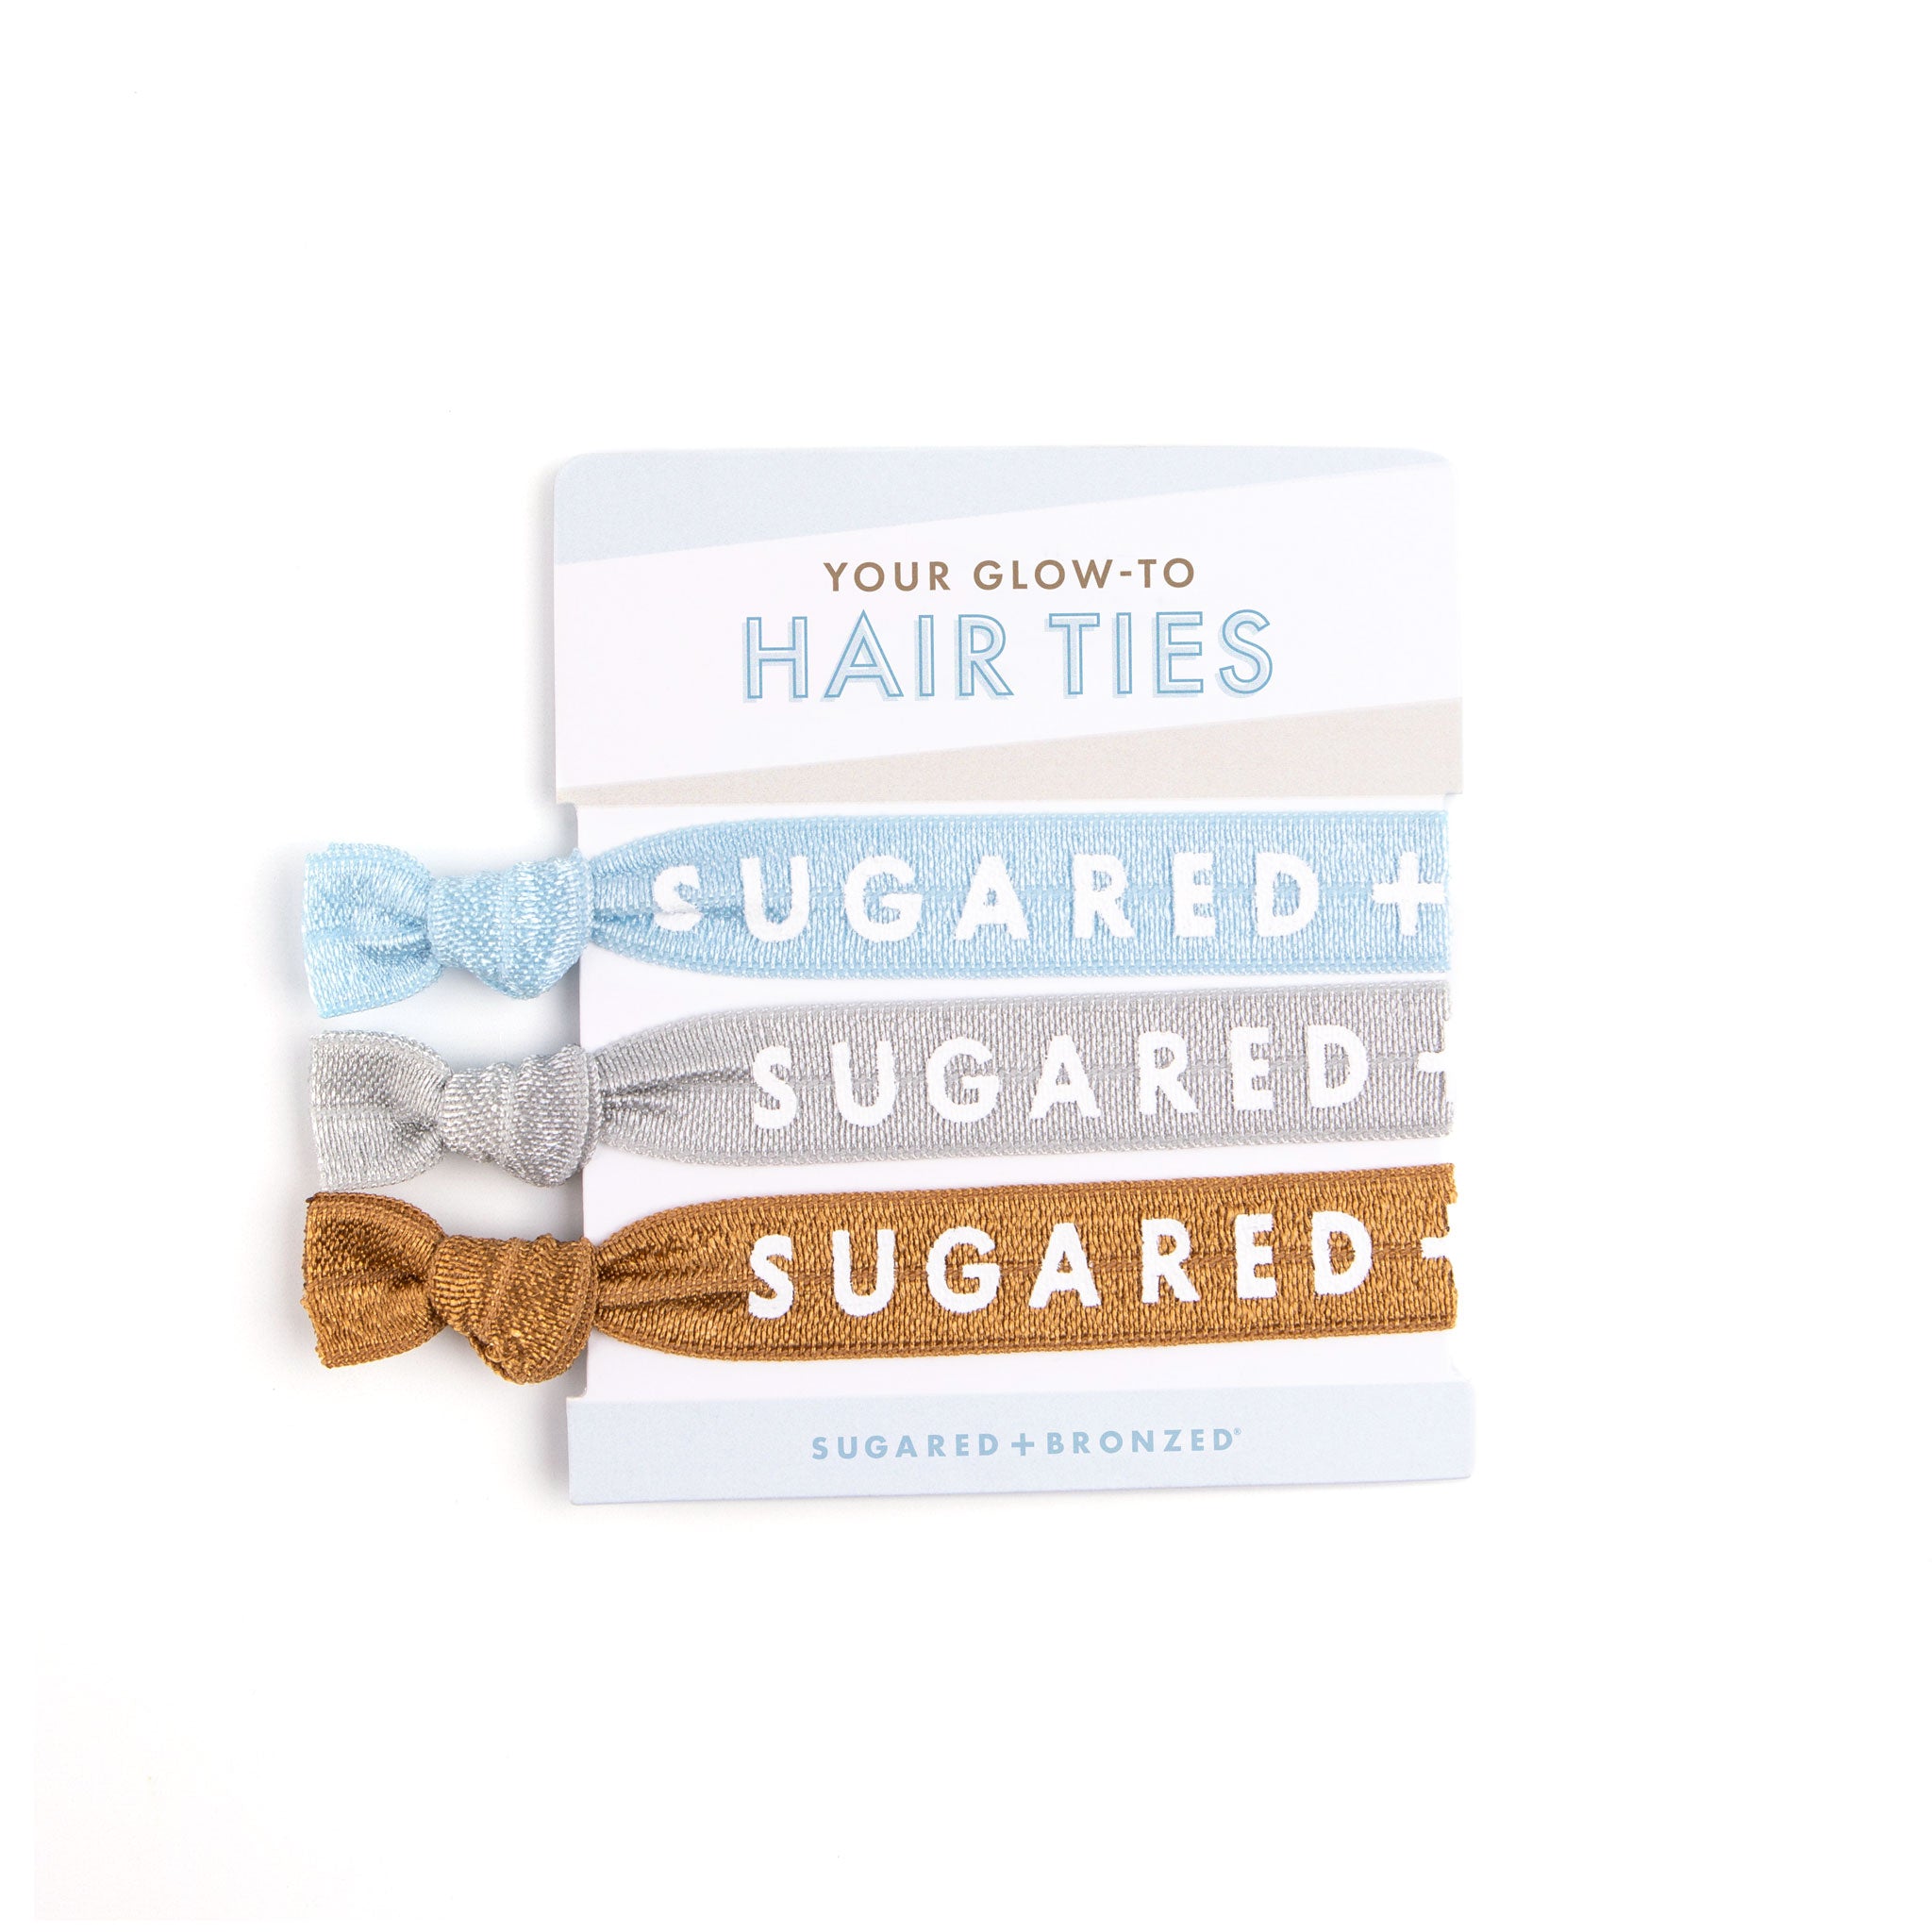 A 3 pack of Sugared and Bronzed hair ties